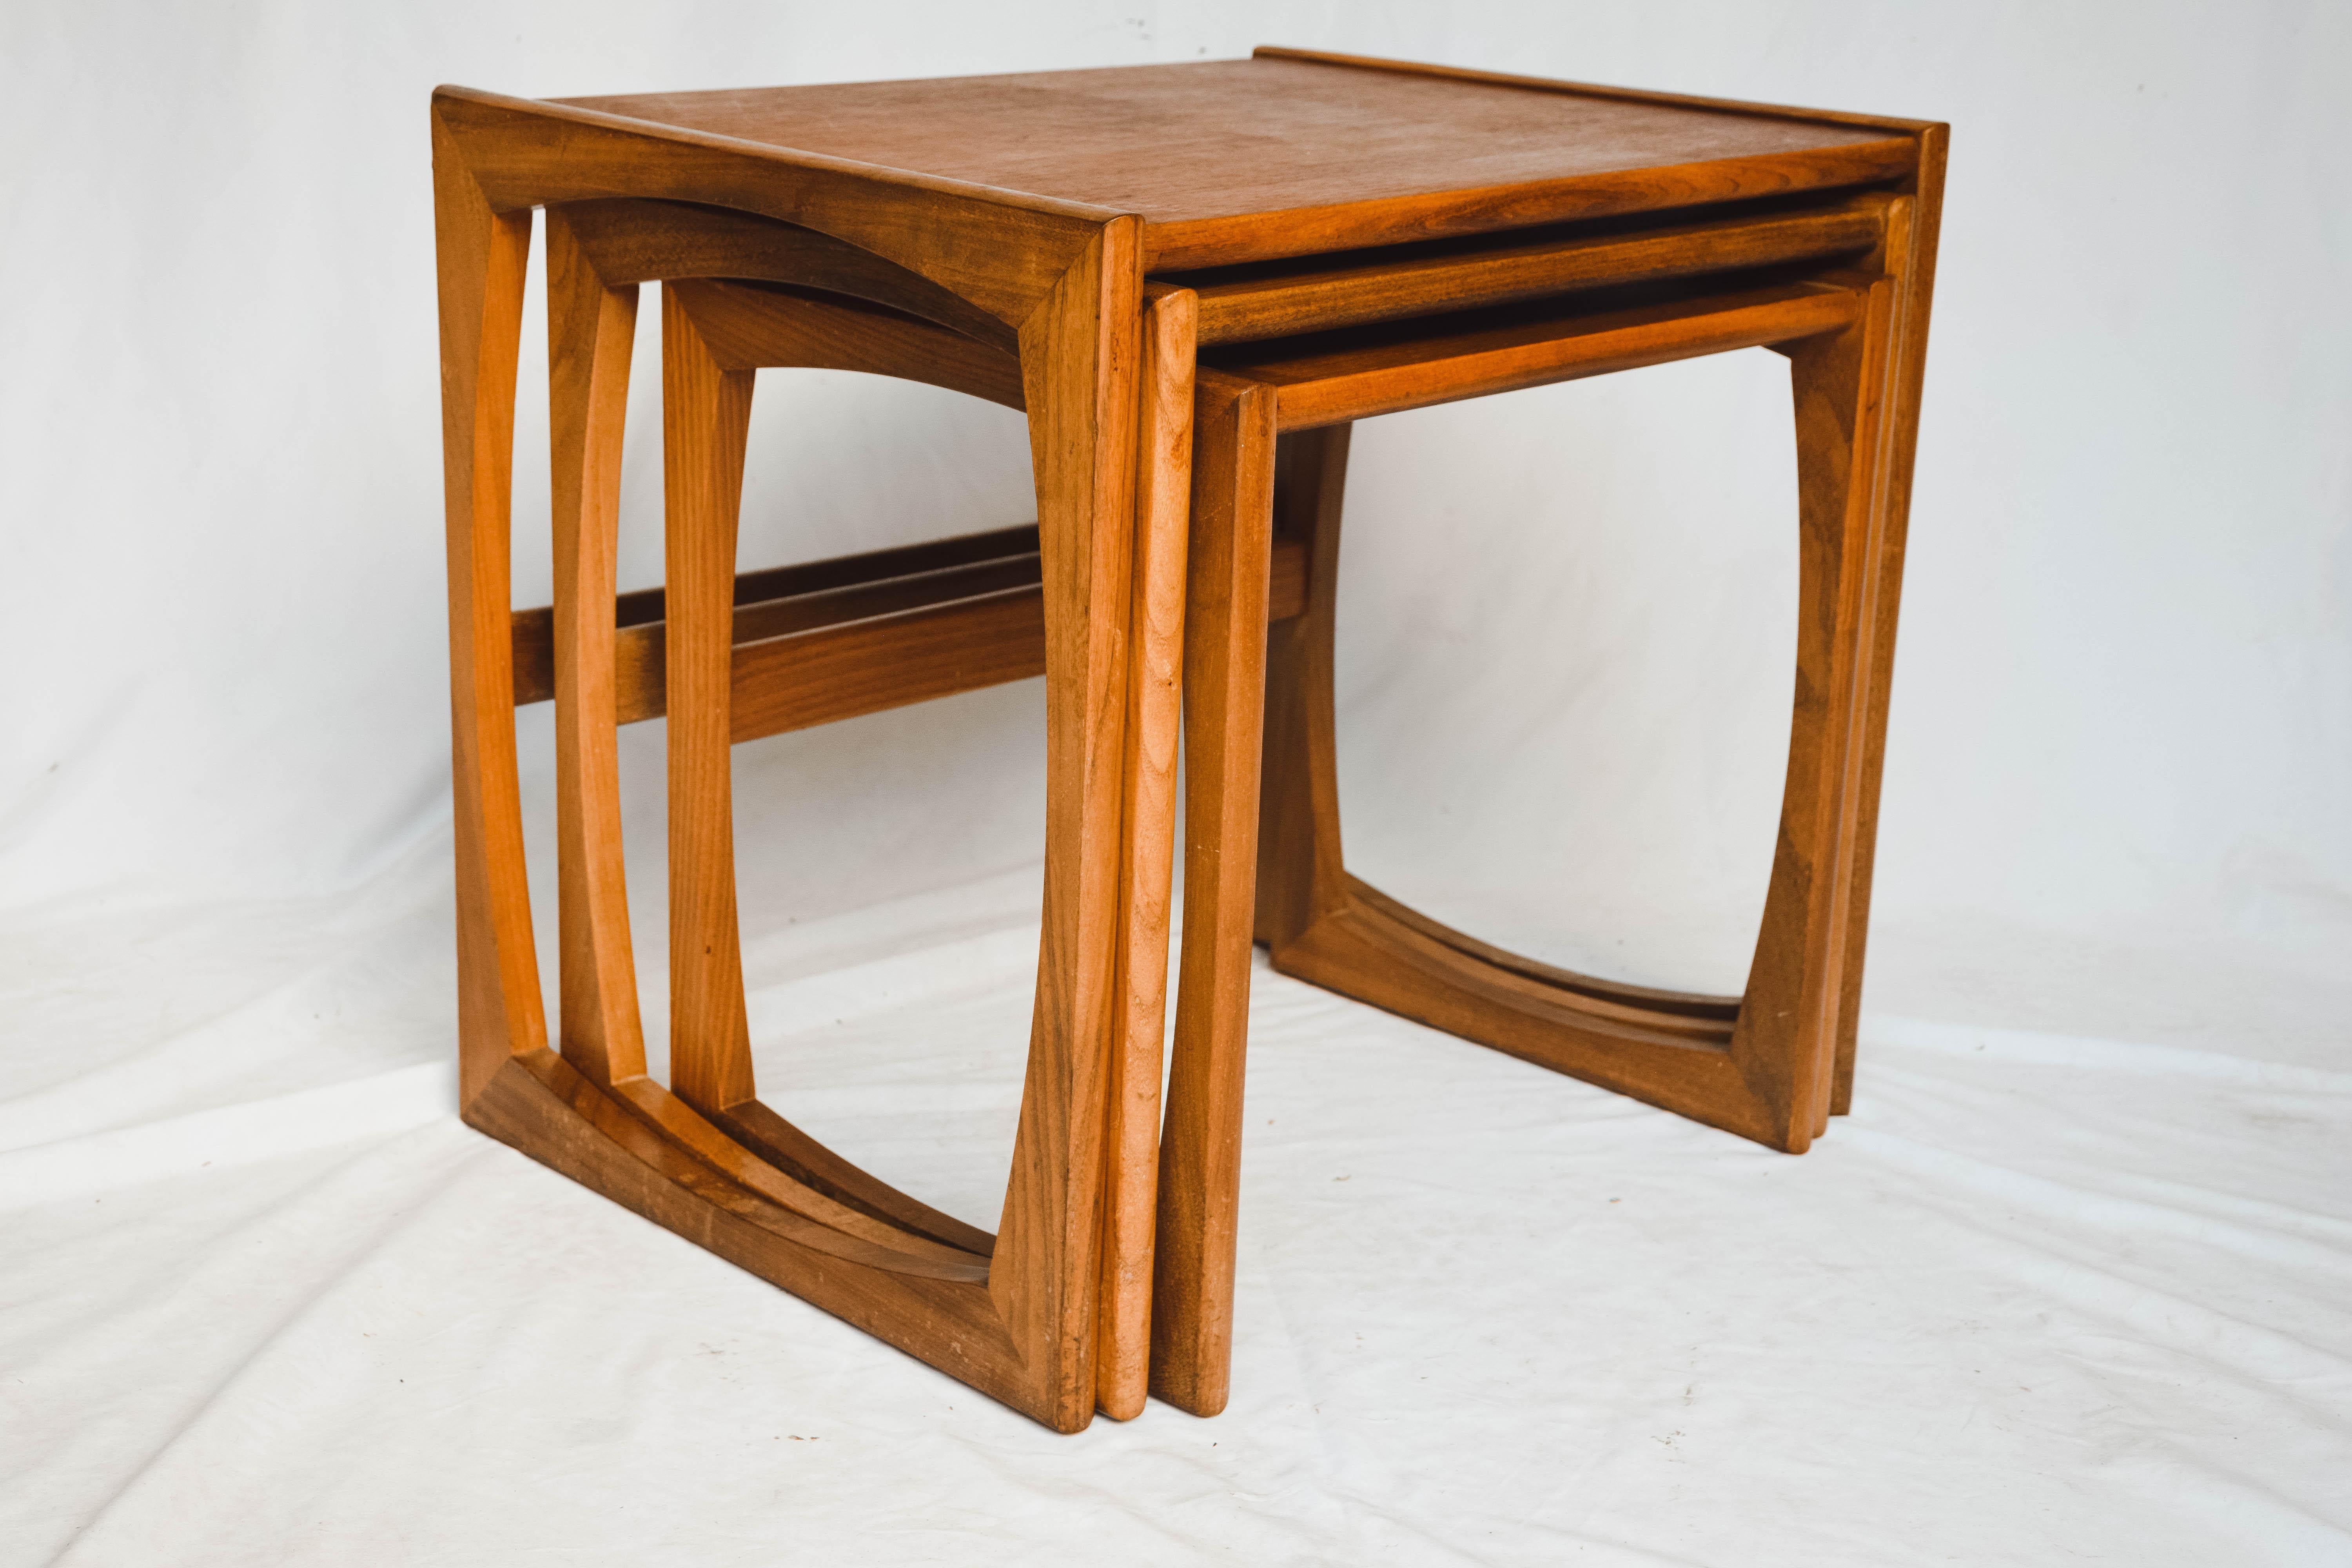 English Mid-Century Modern Quadrille Nesting Table by G-Plan